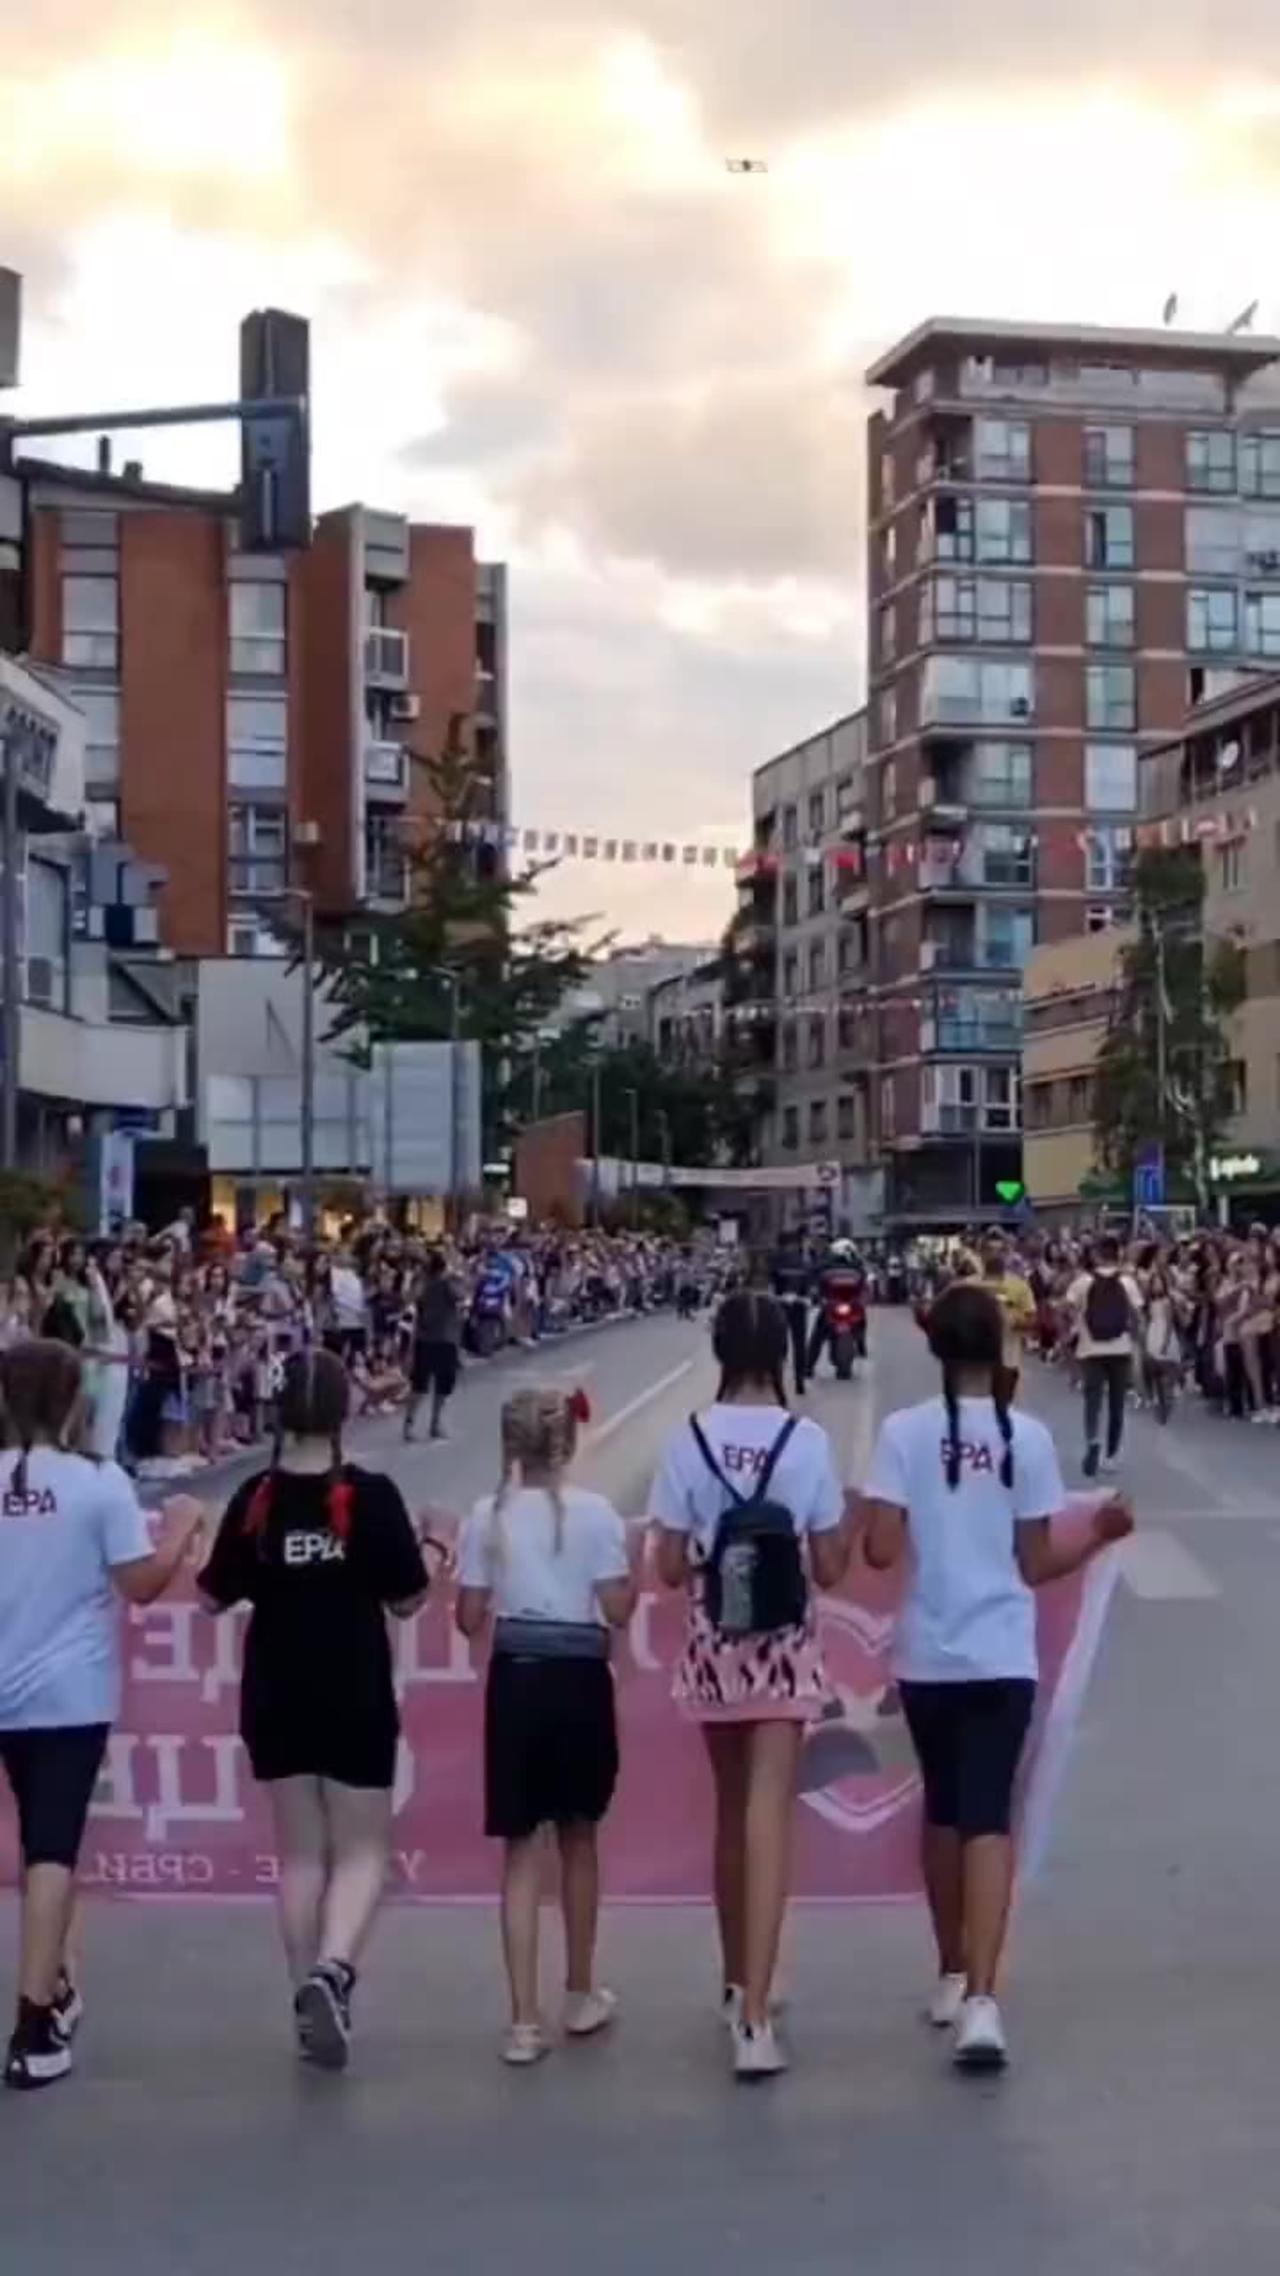 Family Pride parade in Serbia. This is what the world needs more of.